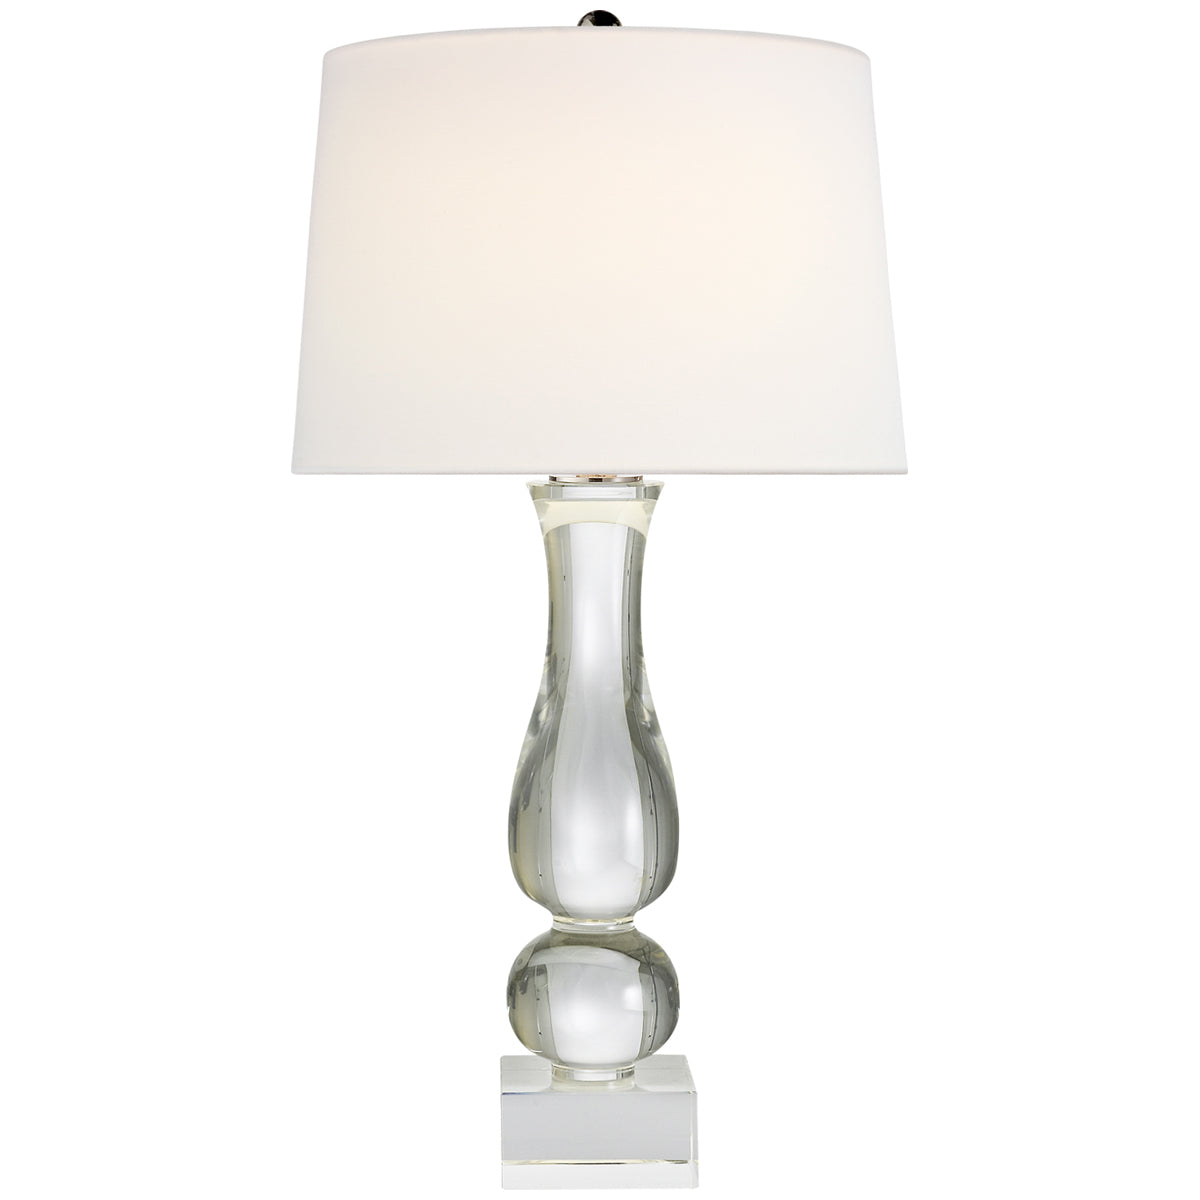 Visual Comfort Contemporary Balustrade Table Lamp in Crystal